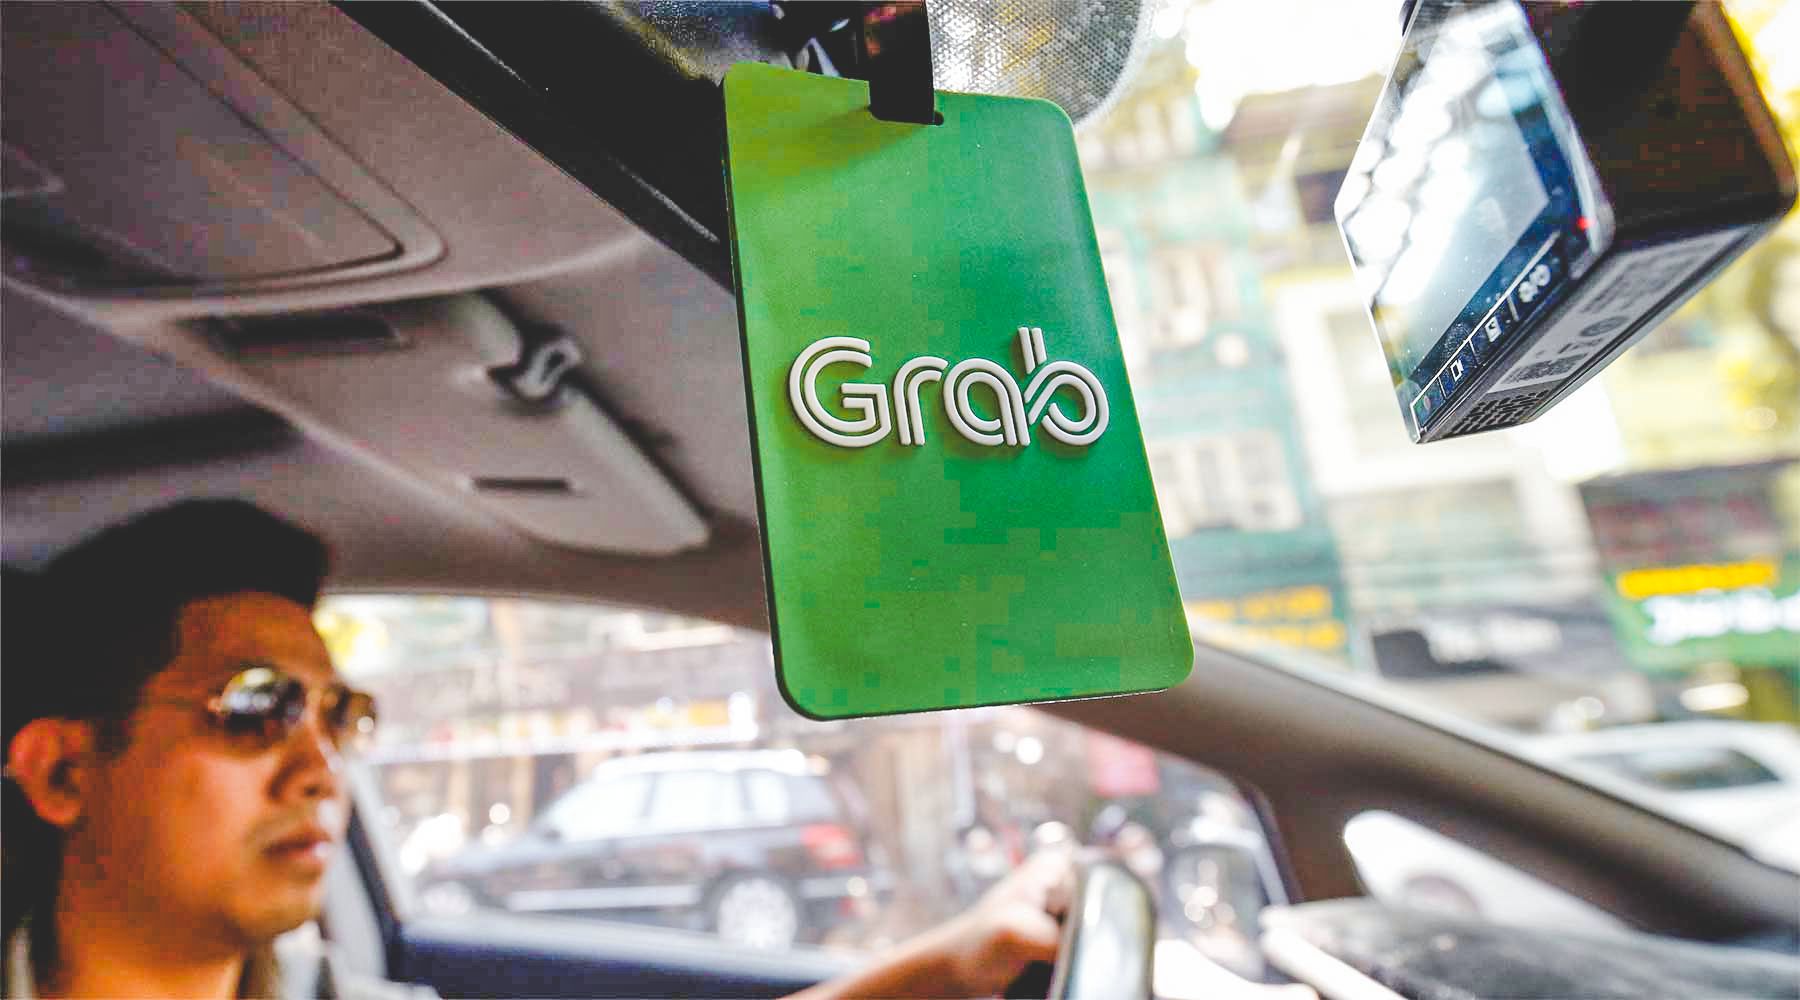 Using Grab Taxi in Vietnam offers a multitude of advantages